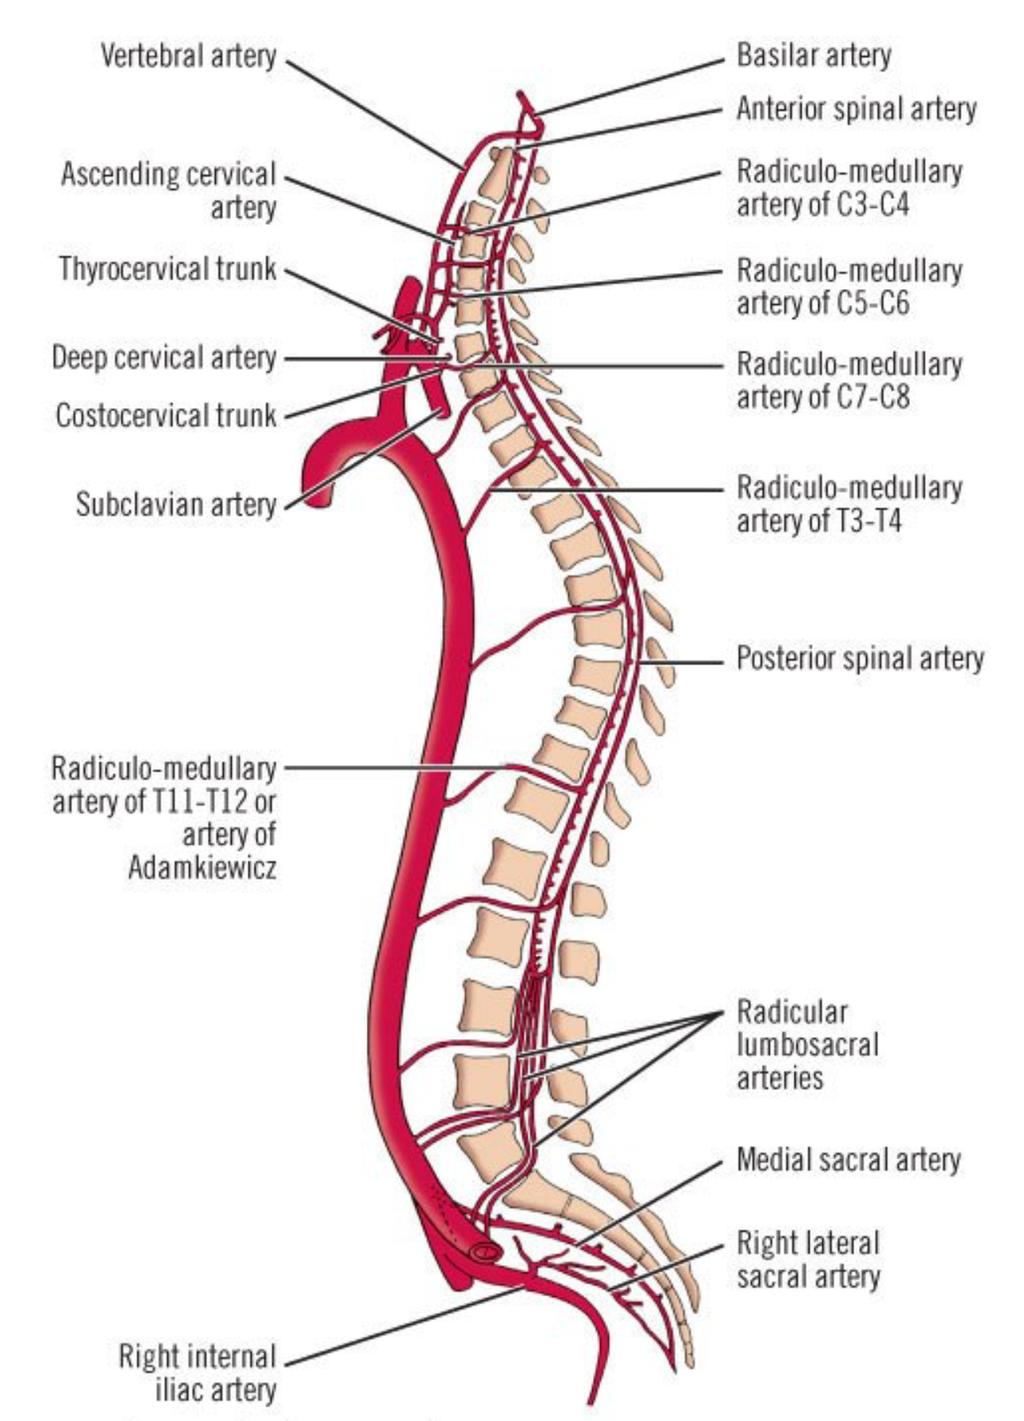 Note that the lateral corticospinal tract and the anterolateral system receive a dual blood supply;